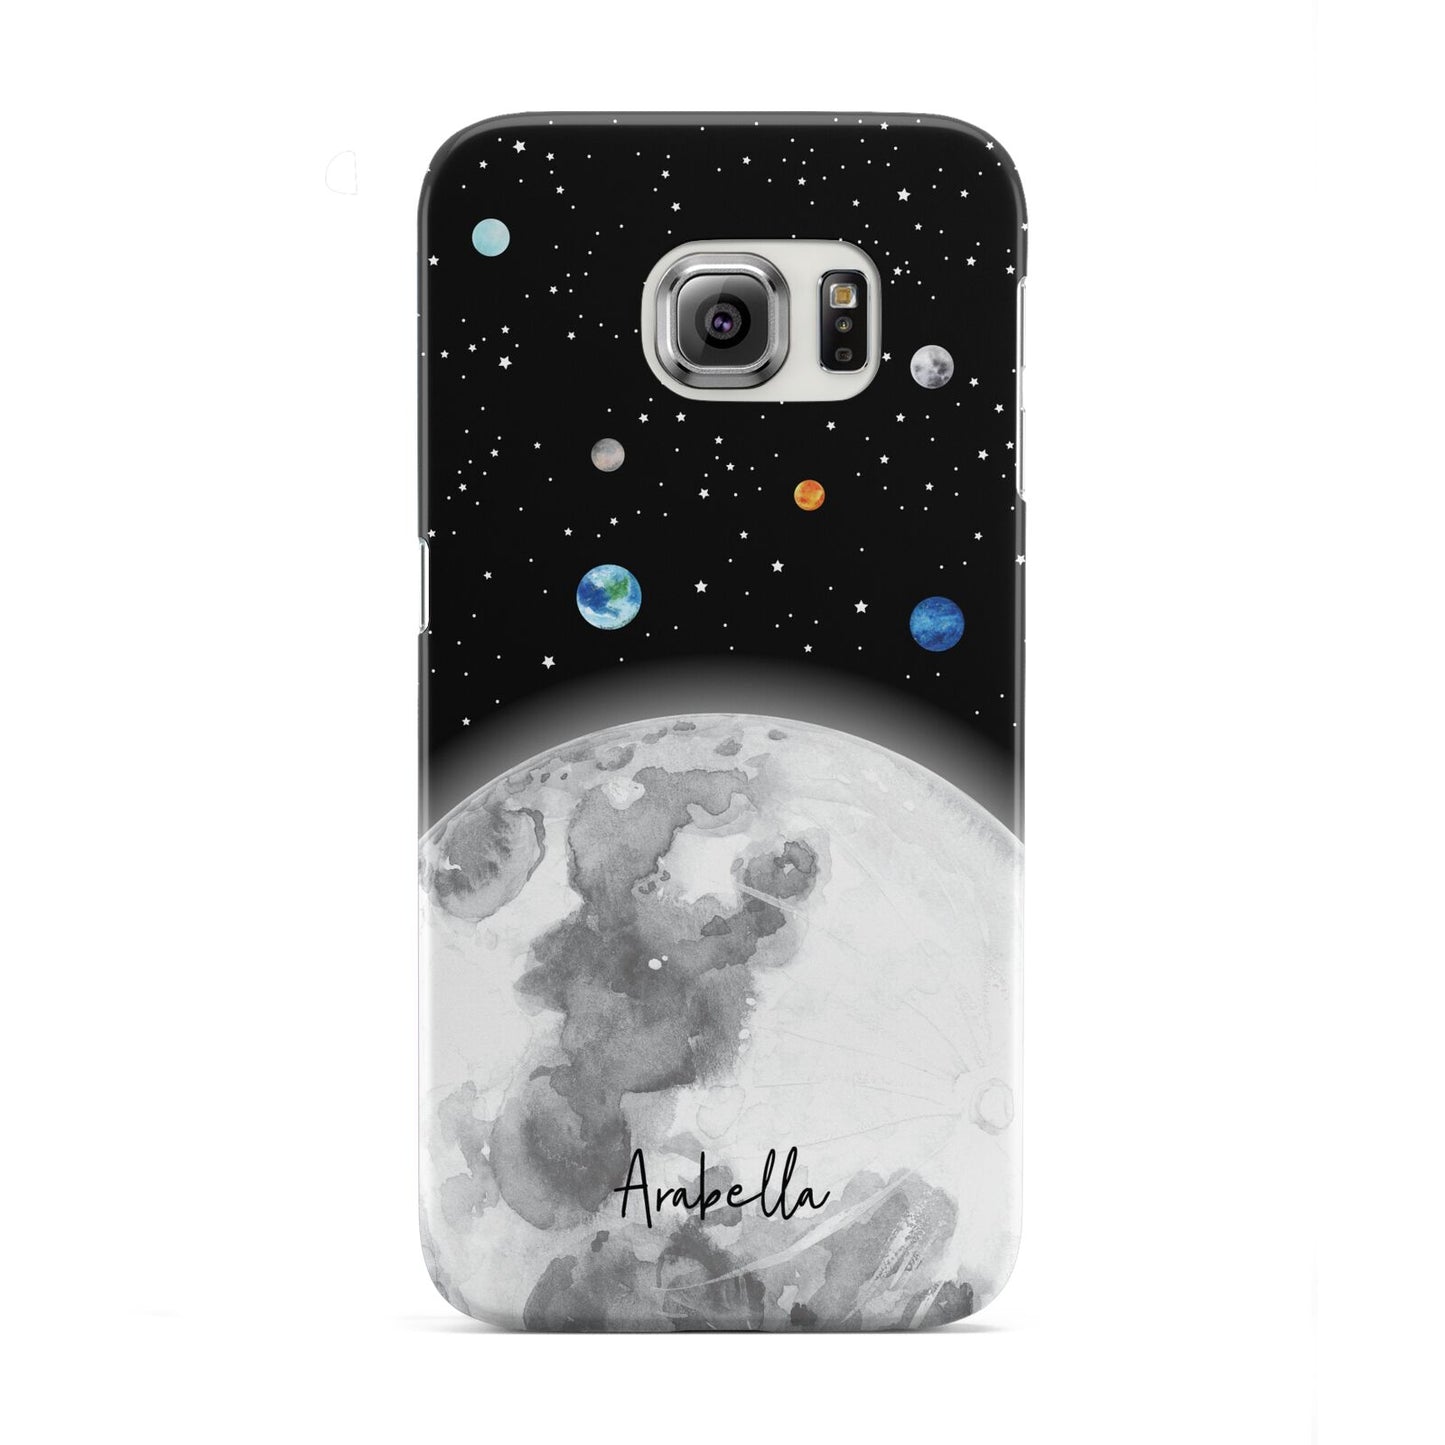 Watercolour Close up Moon with Name Samsung Galaxy S6 Edge Case